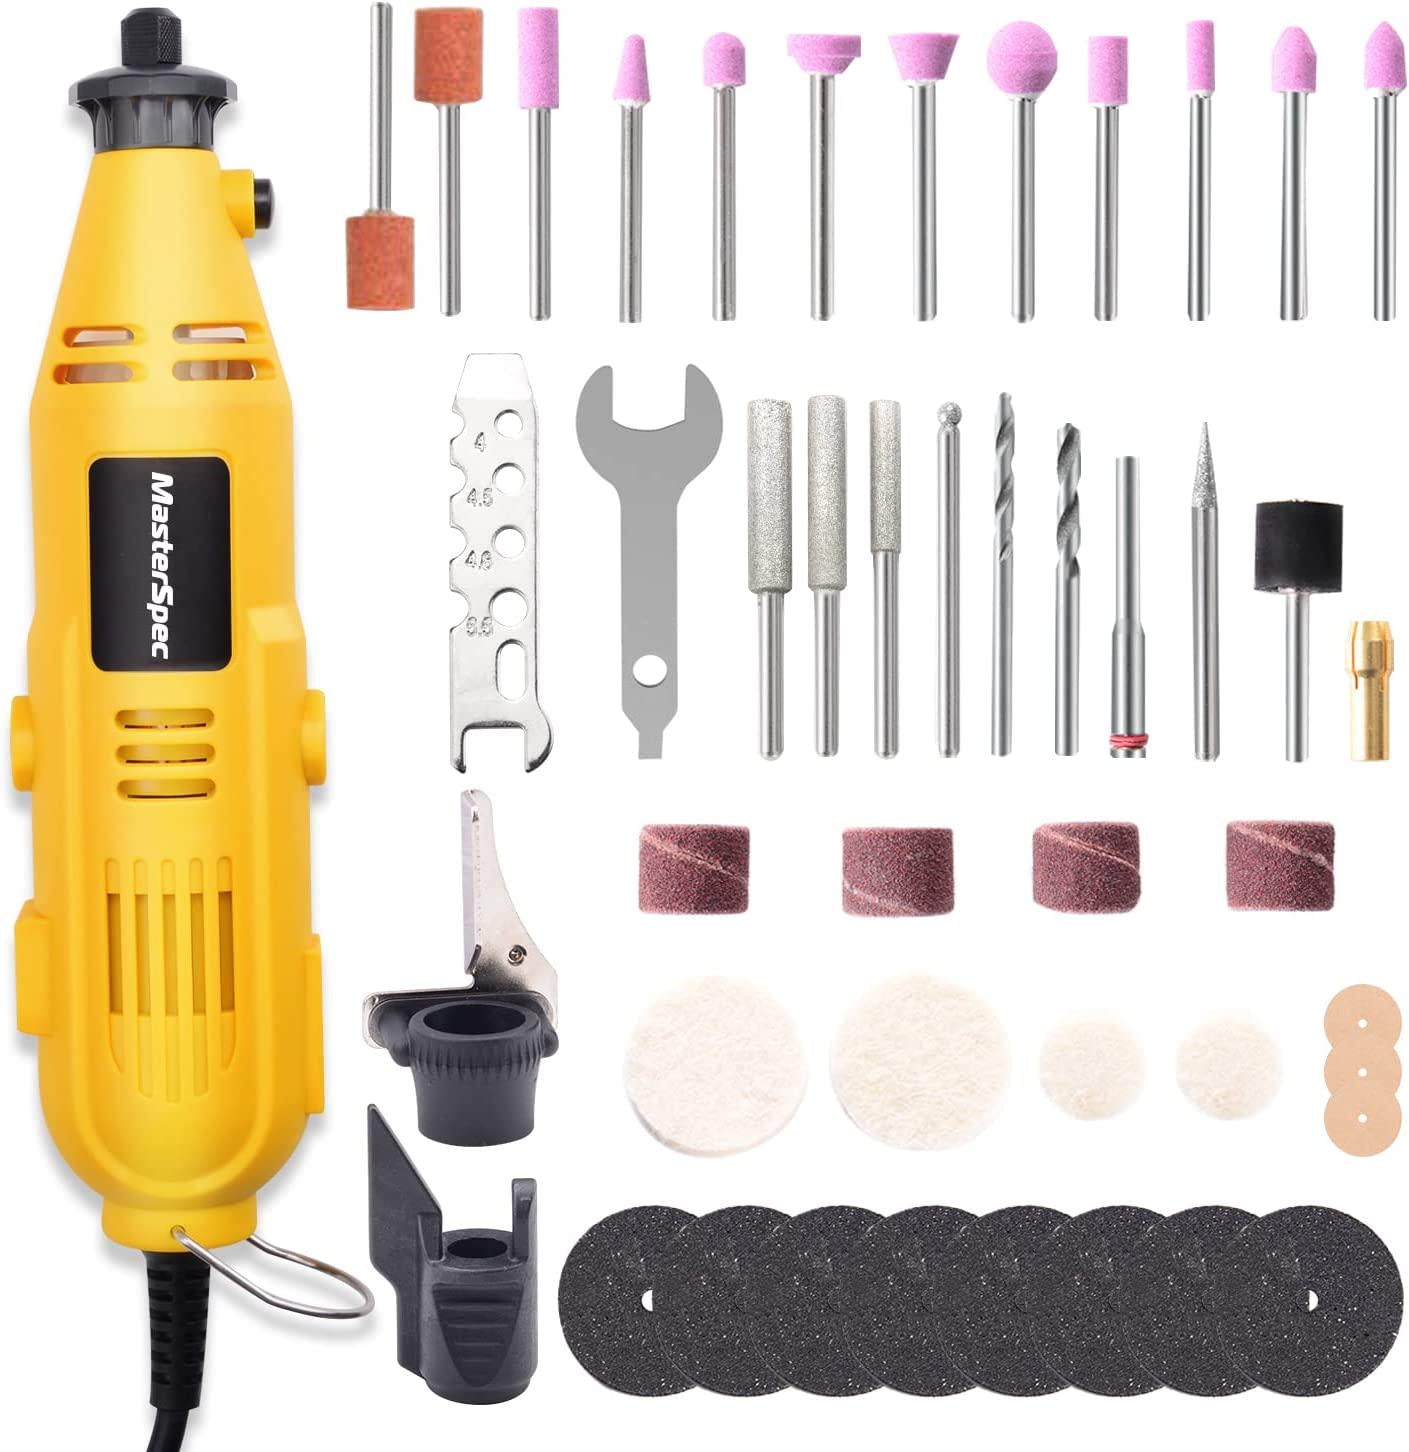 MasterSpec, MasterSpec Rotary Tool Kit Grinder Polisher Knife Chainsaw Sharpener Multi Acces